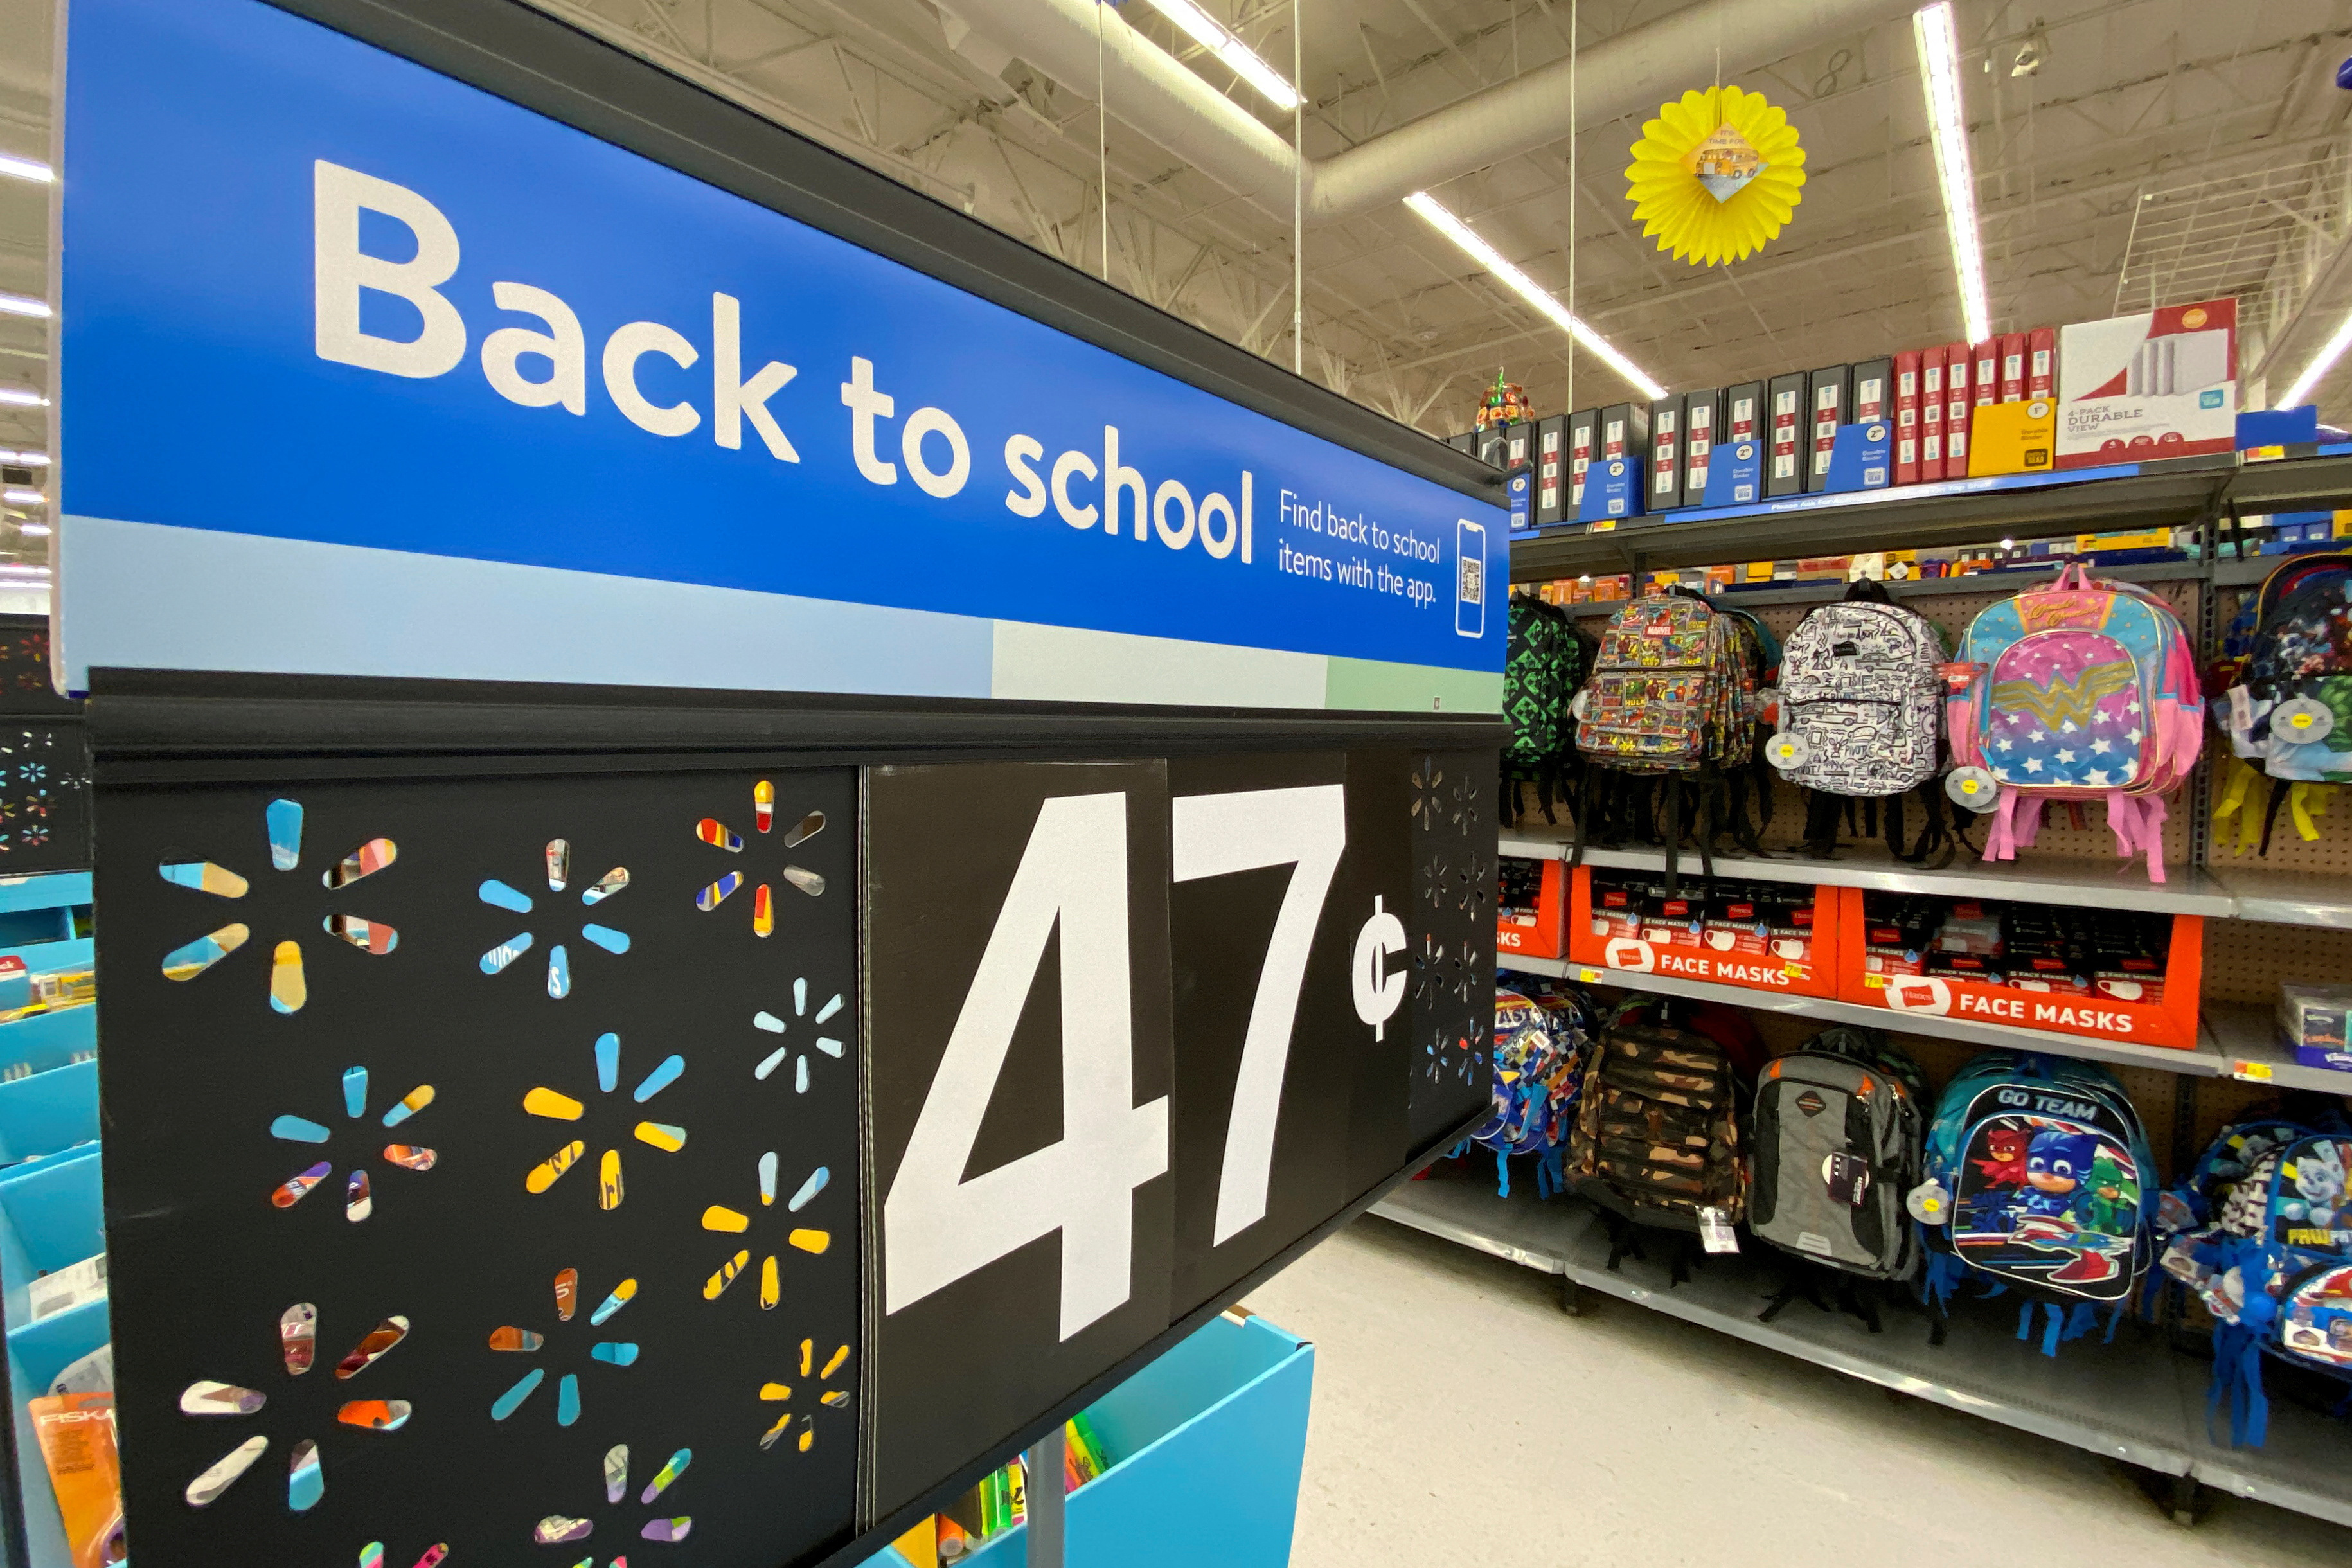 Back to school supplies for sale in U.S. department stores